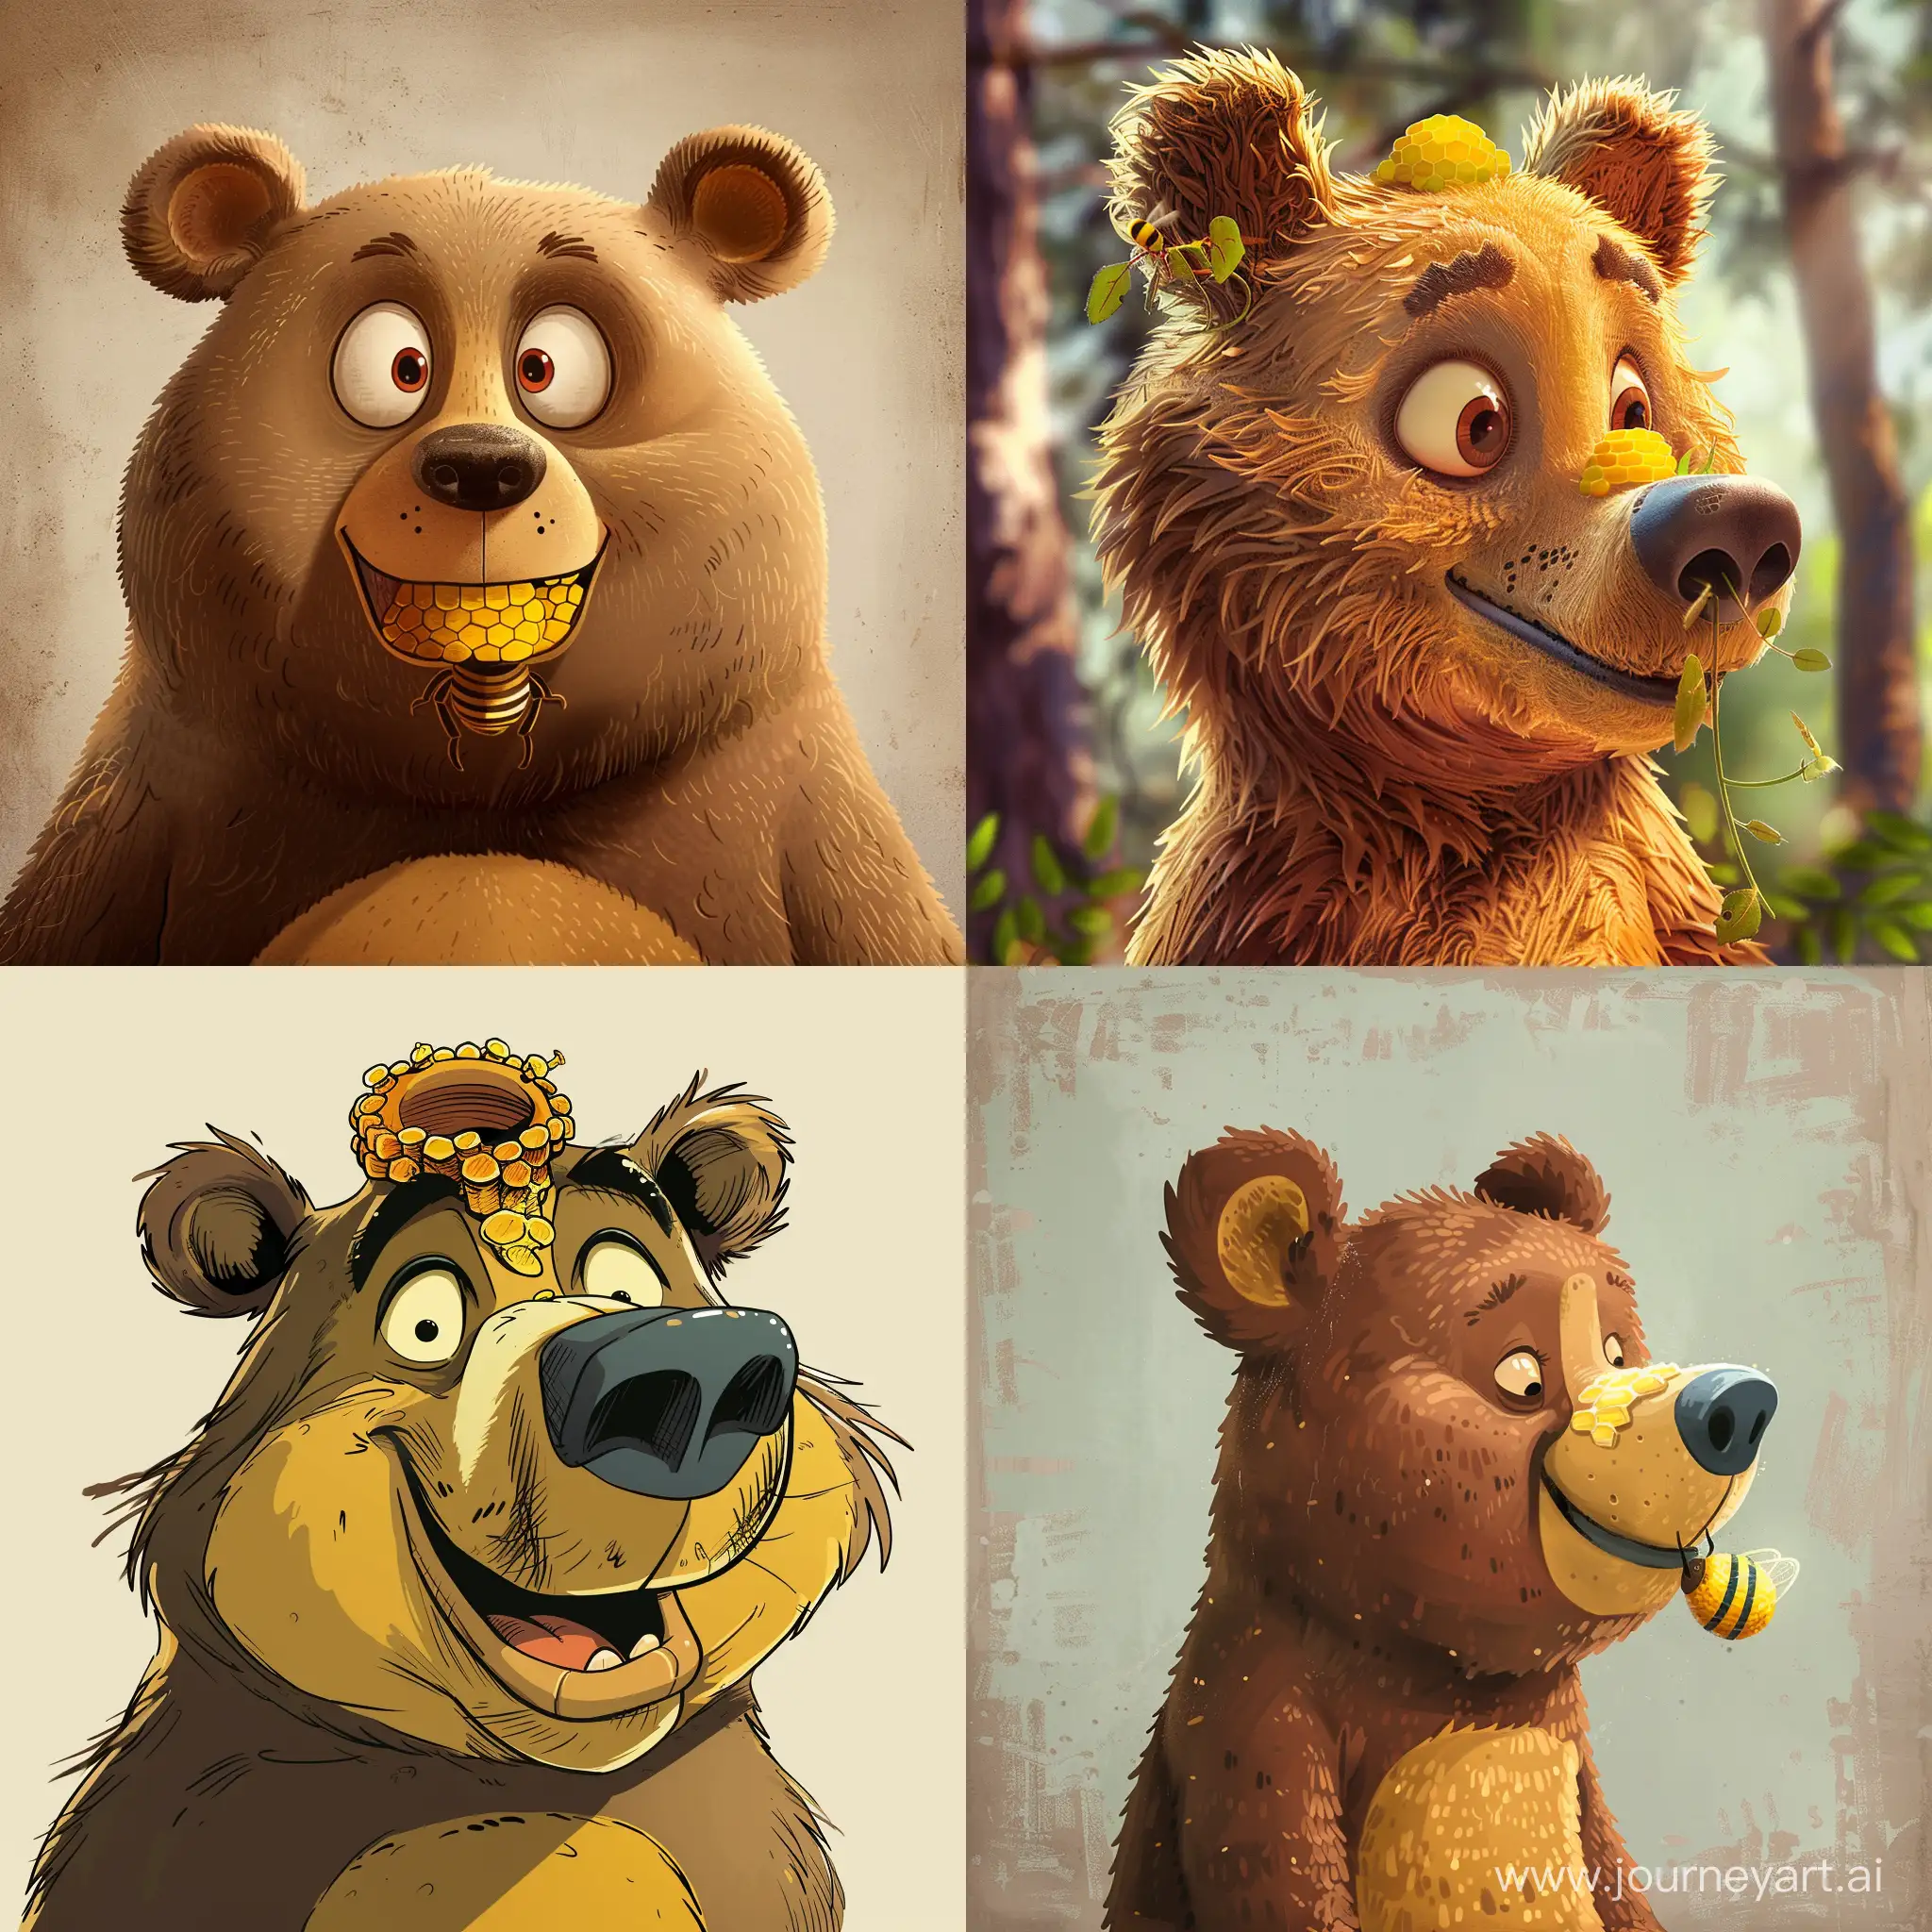 A cartoon bear with a beehive in his nose, reminiscent of old 1950’s cartoons